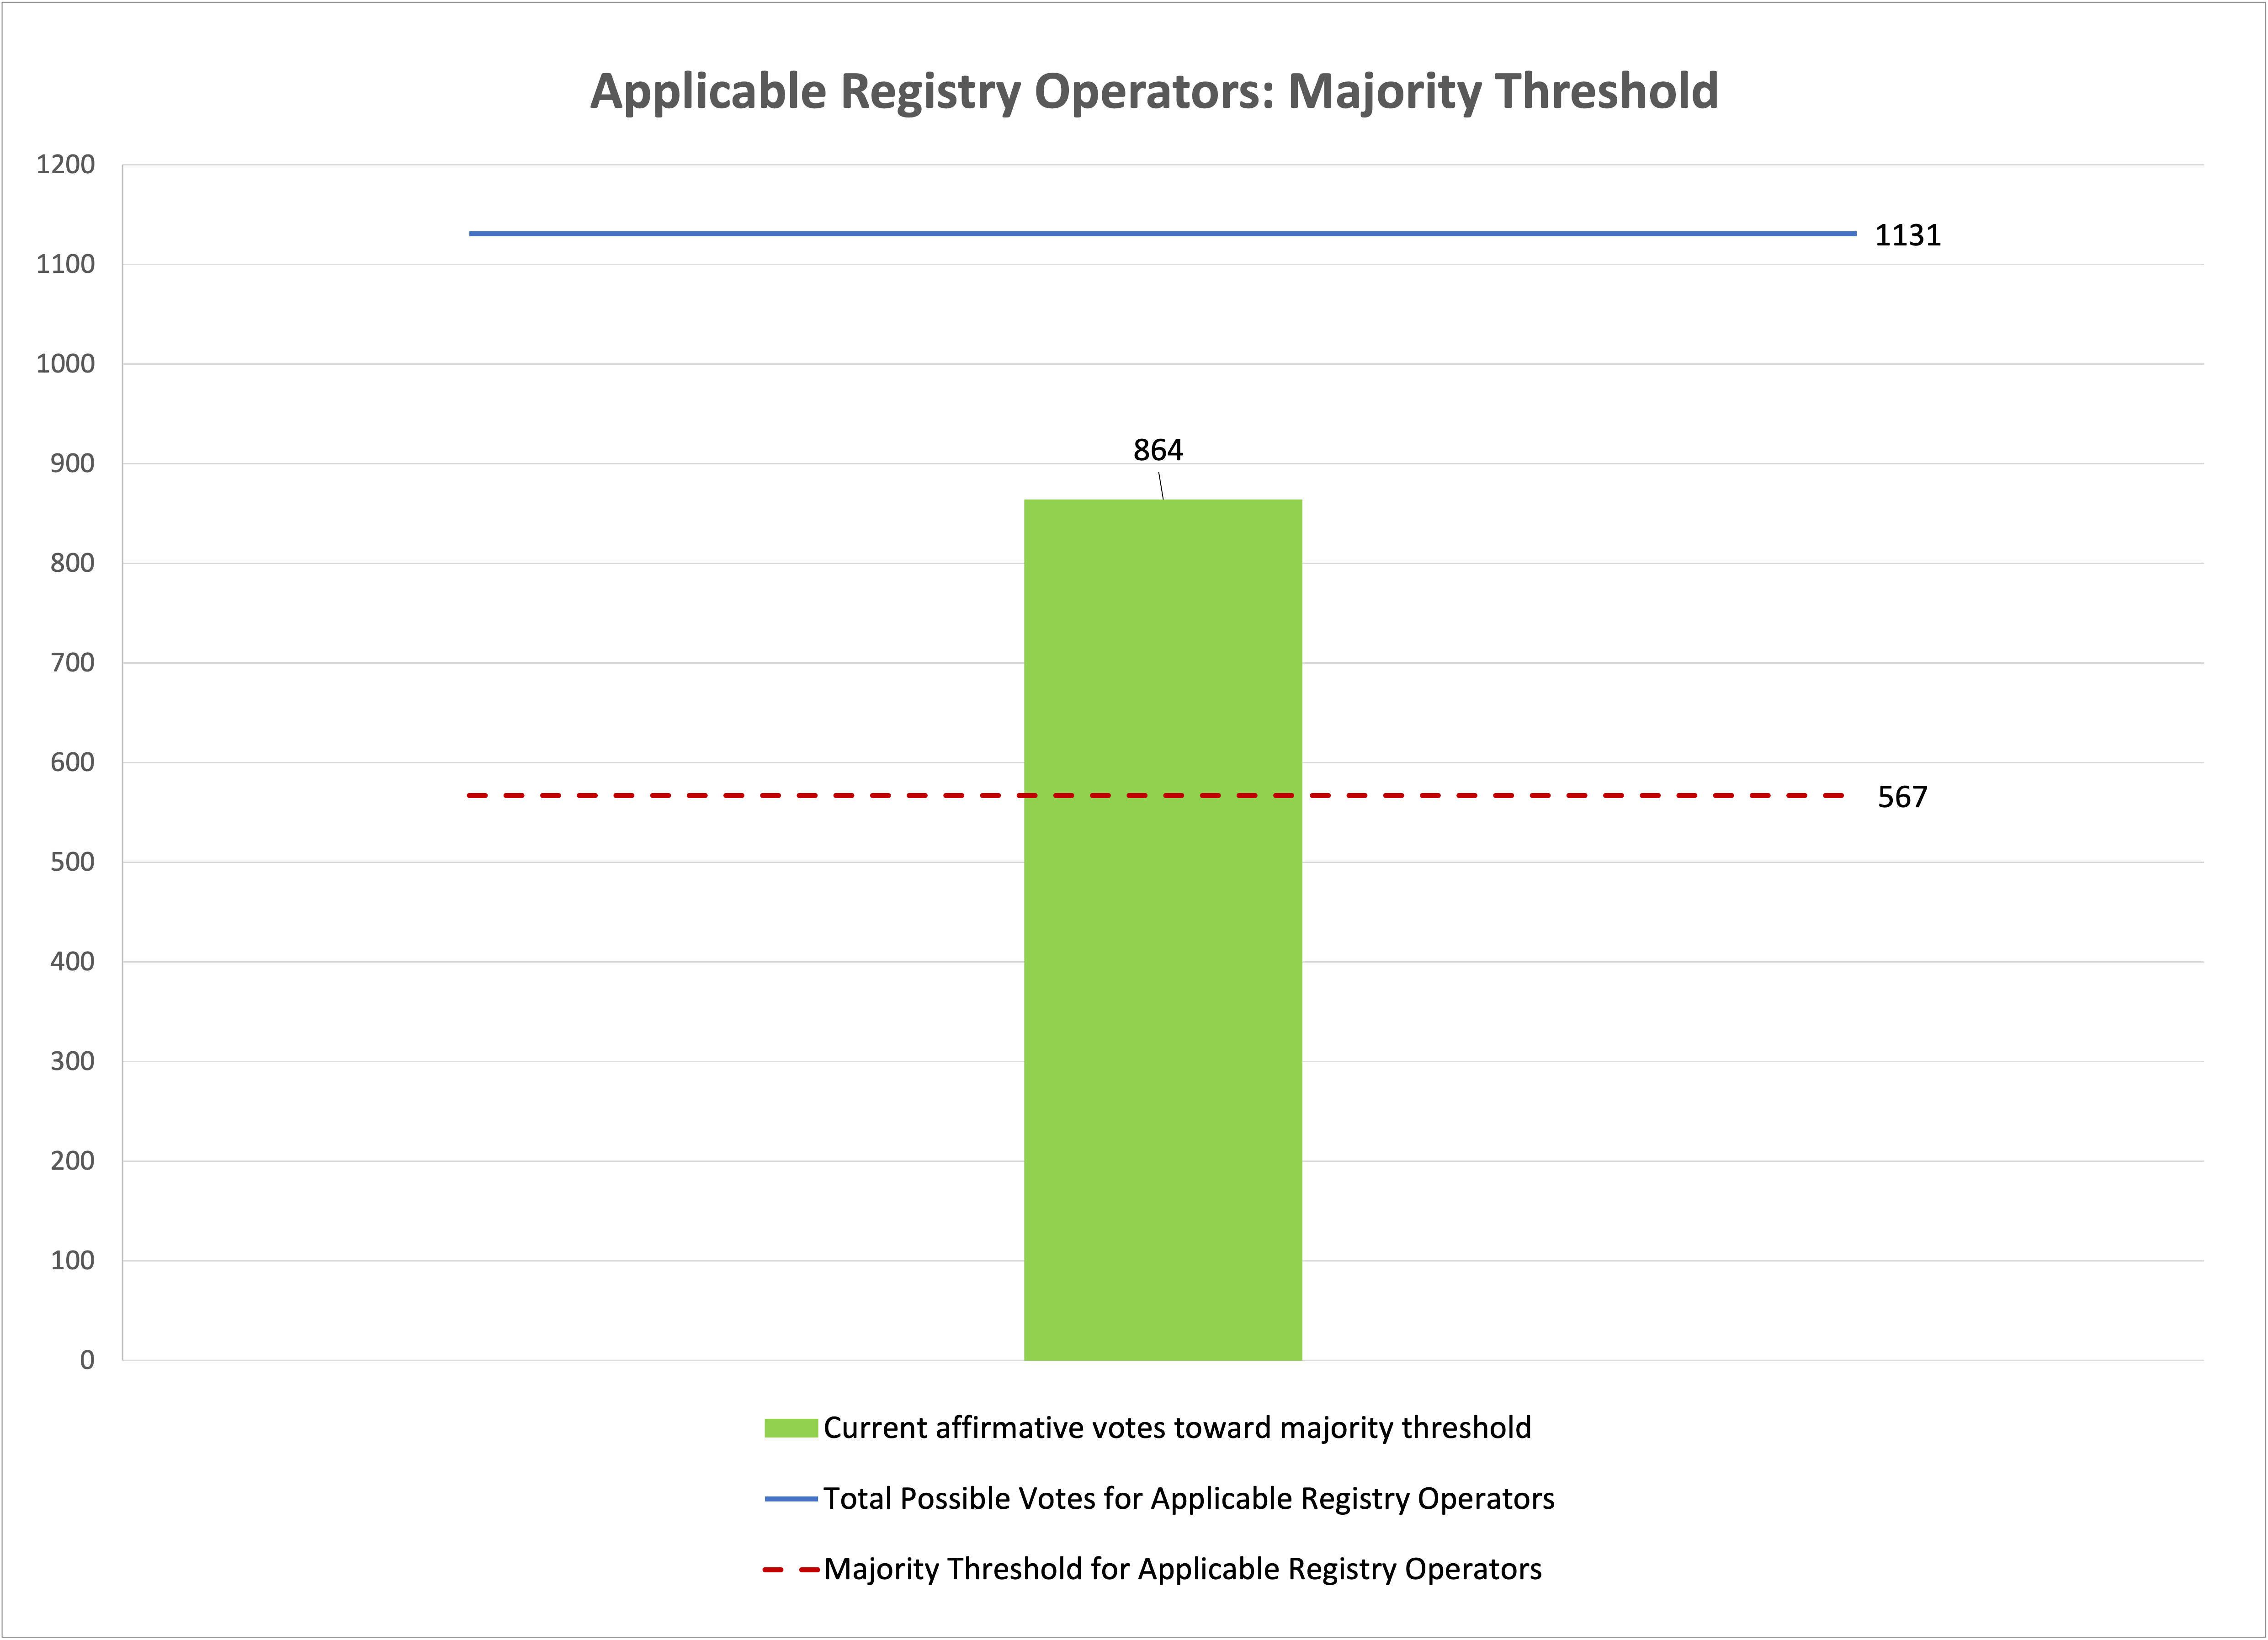 Bar chart of the progress of the vote towards meeting the majority threshold for Applicable Registry Operators. Majority approval threshold of 567, with current affirmative votes toward the majority threshold at 864.